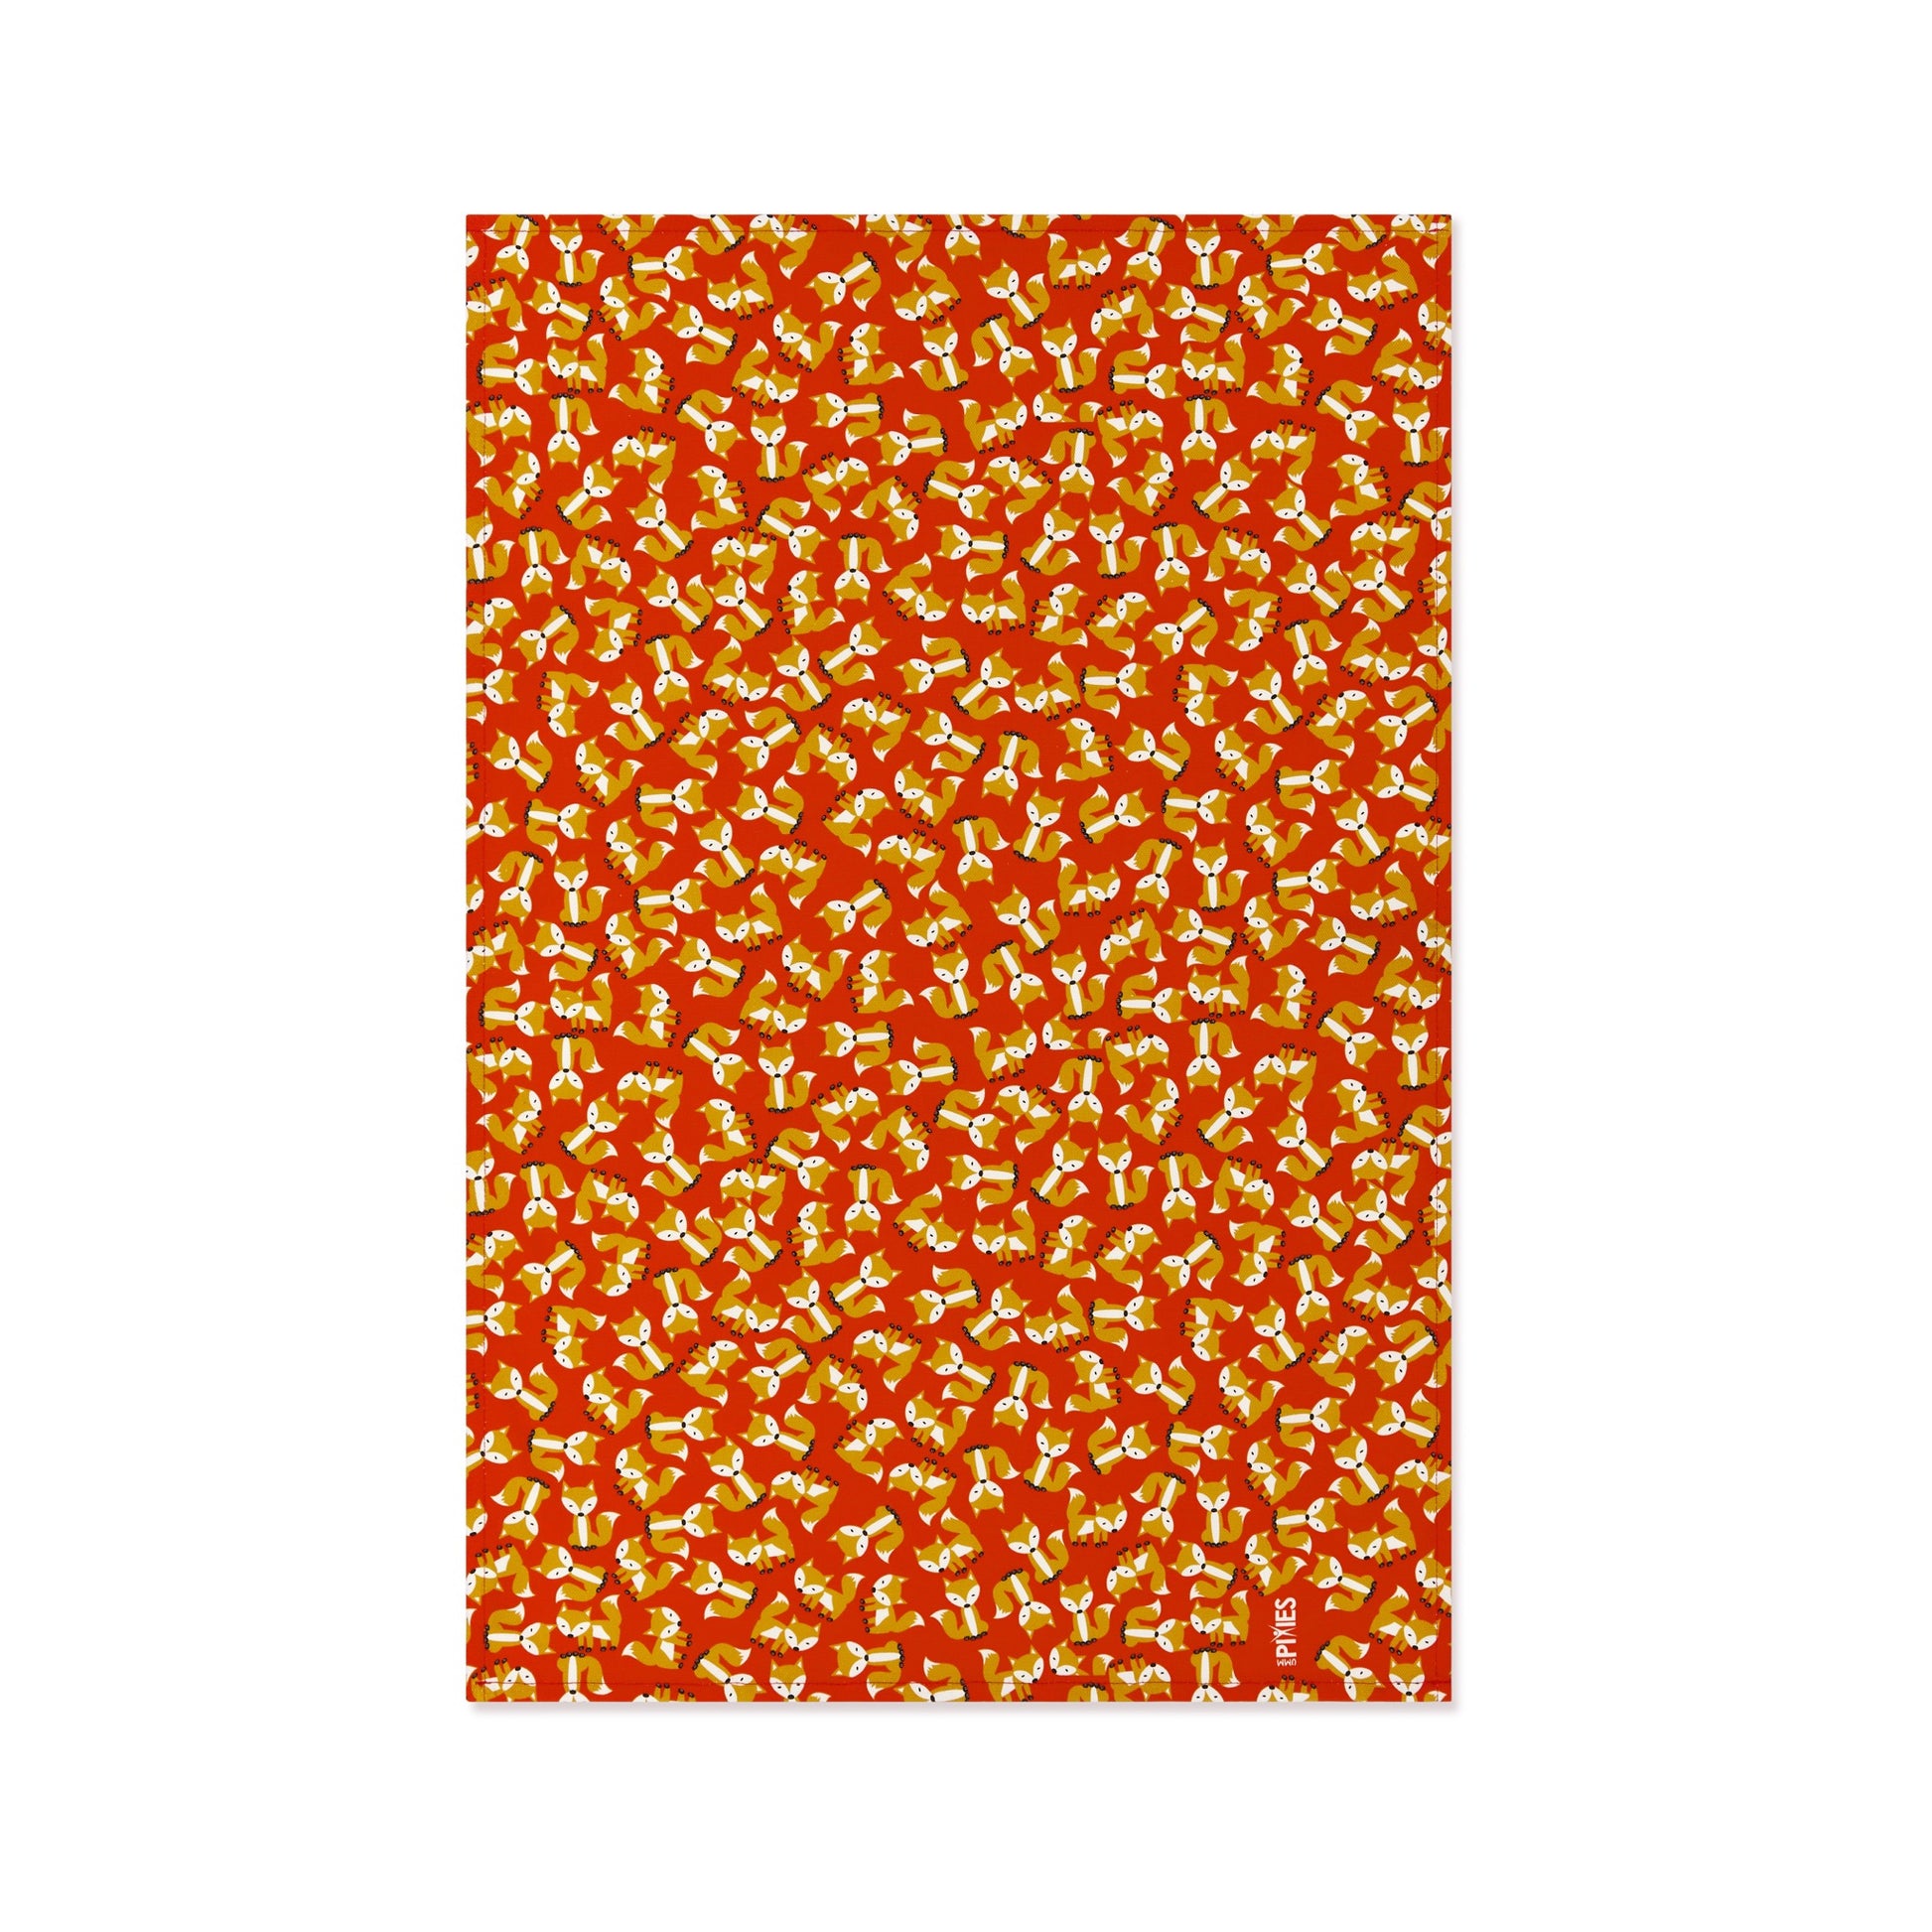 Red Scattered Foxes Tea Towel in organic Cotton from UmmPixies. Designed and made in the UK